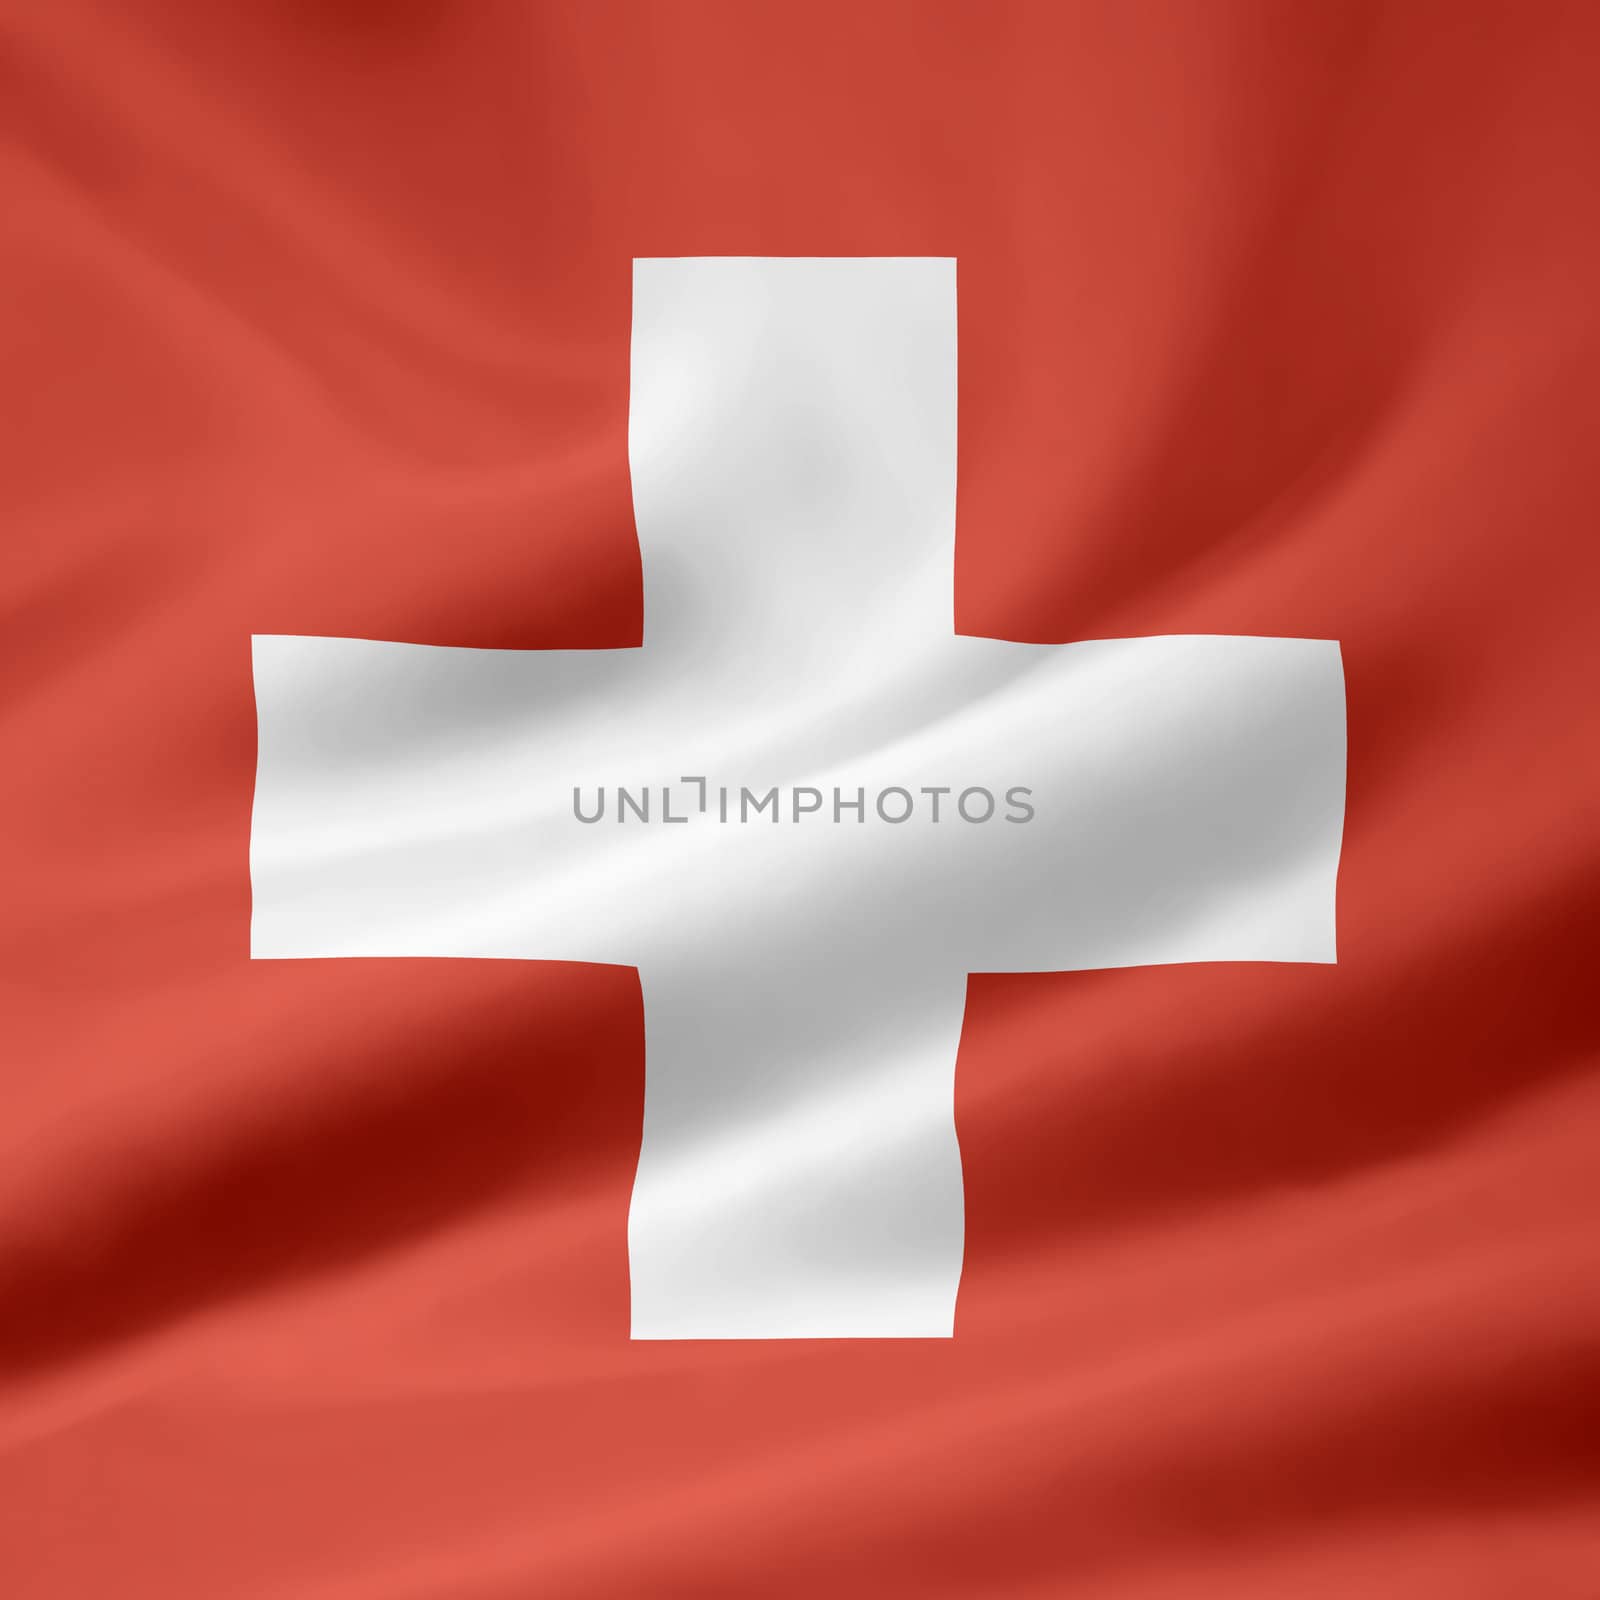 Very large version of a swiss flag. This format equals the legal swiss format